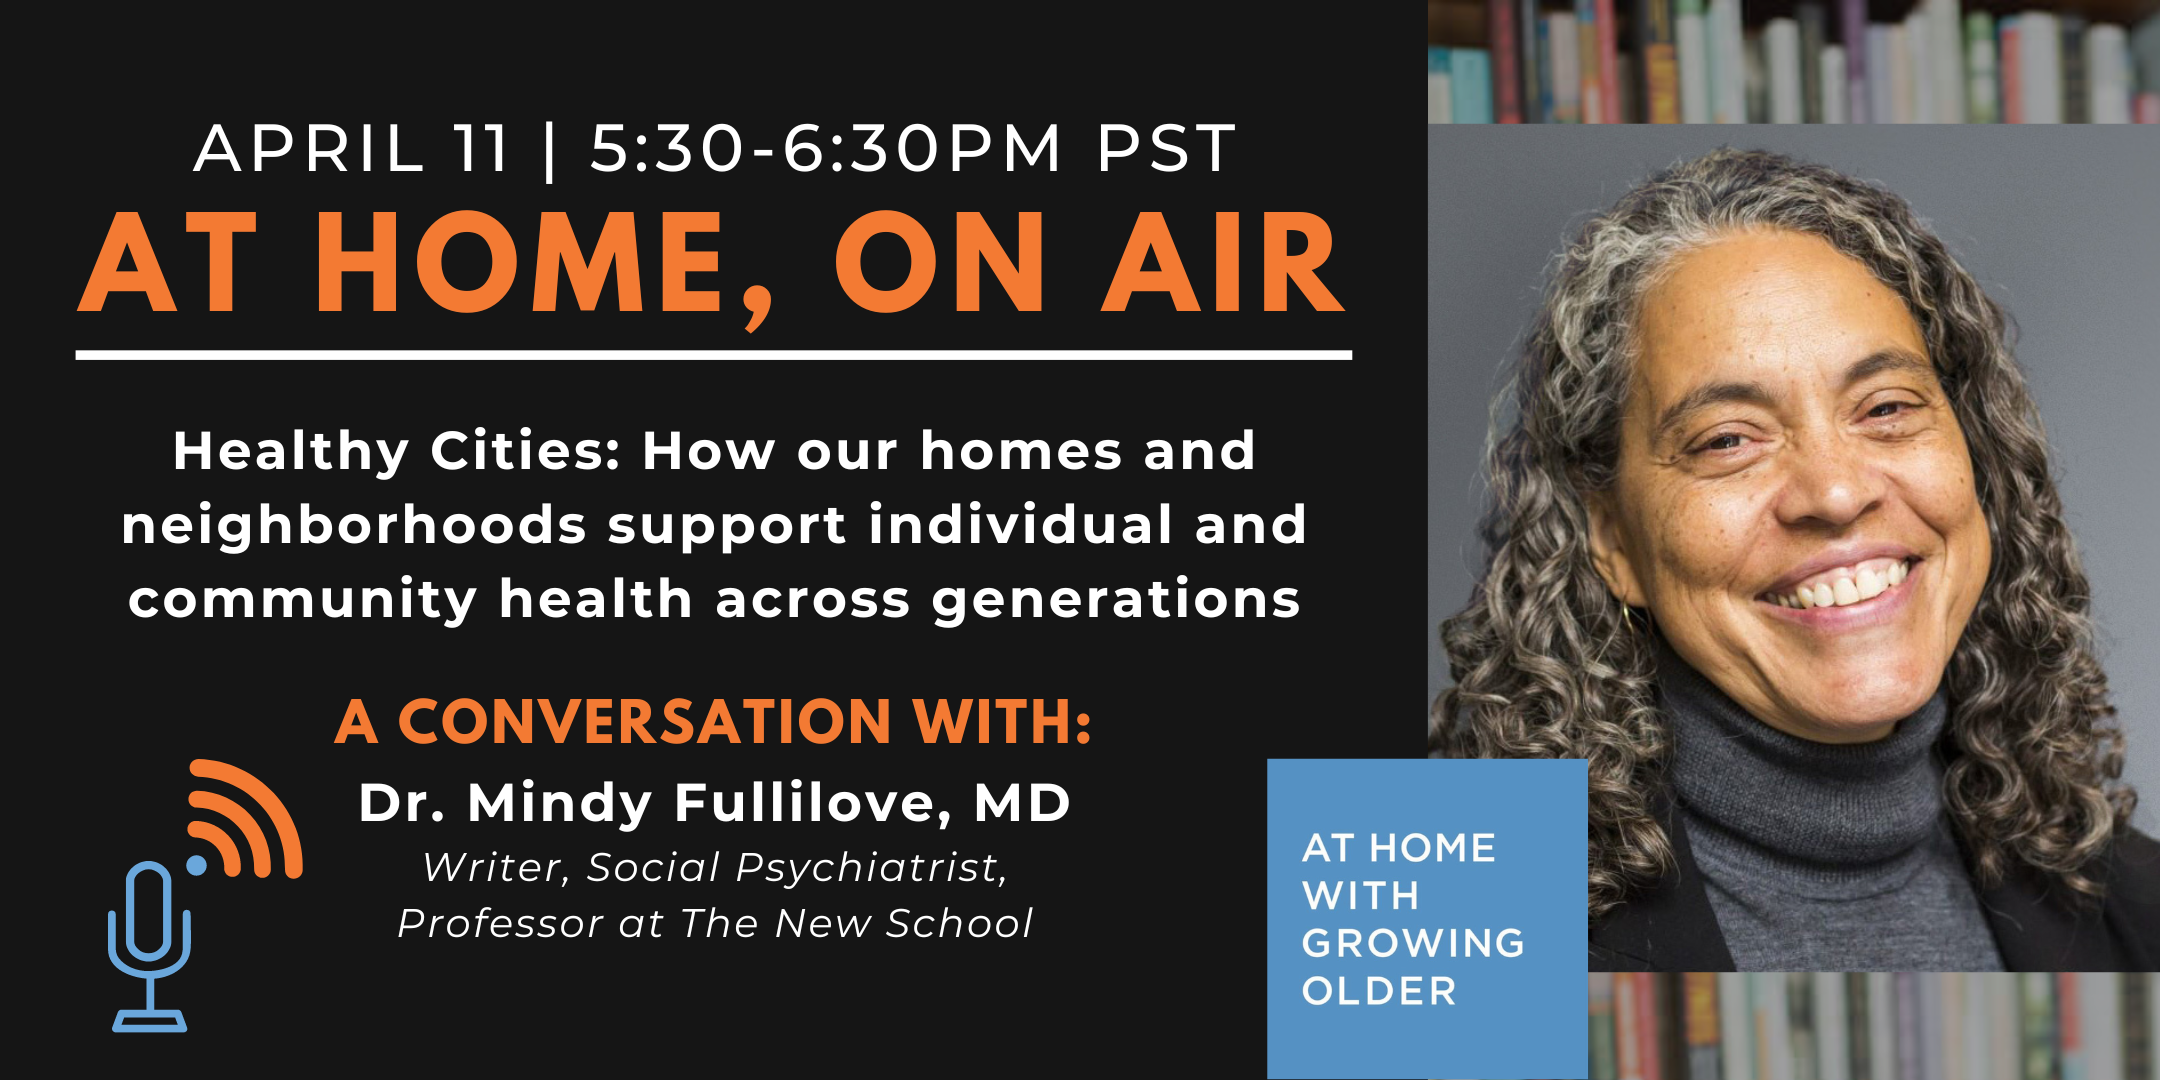 At Home, On Air: A Conversation with Dr. Mindy Fullilove